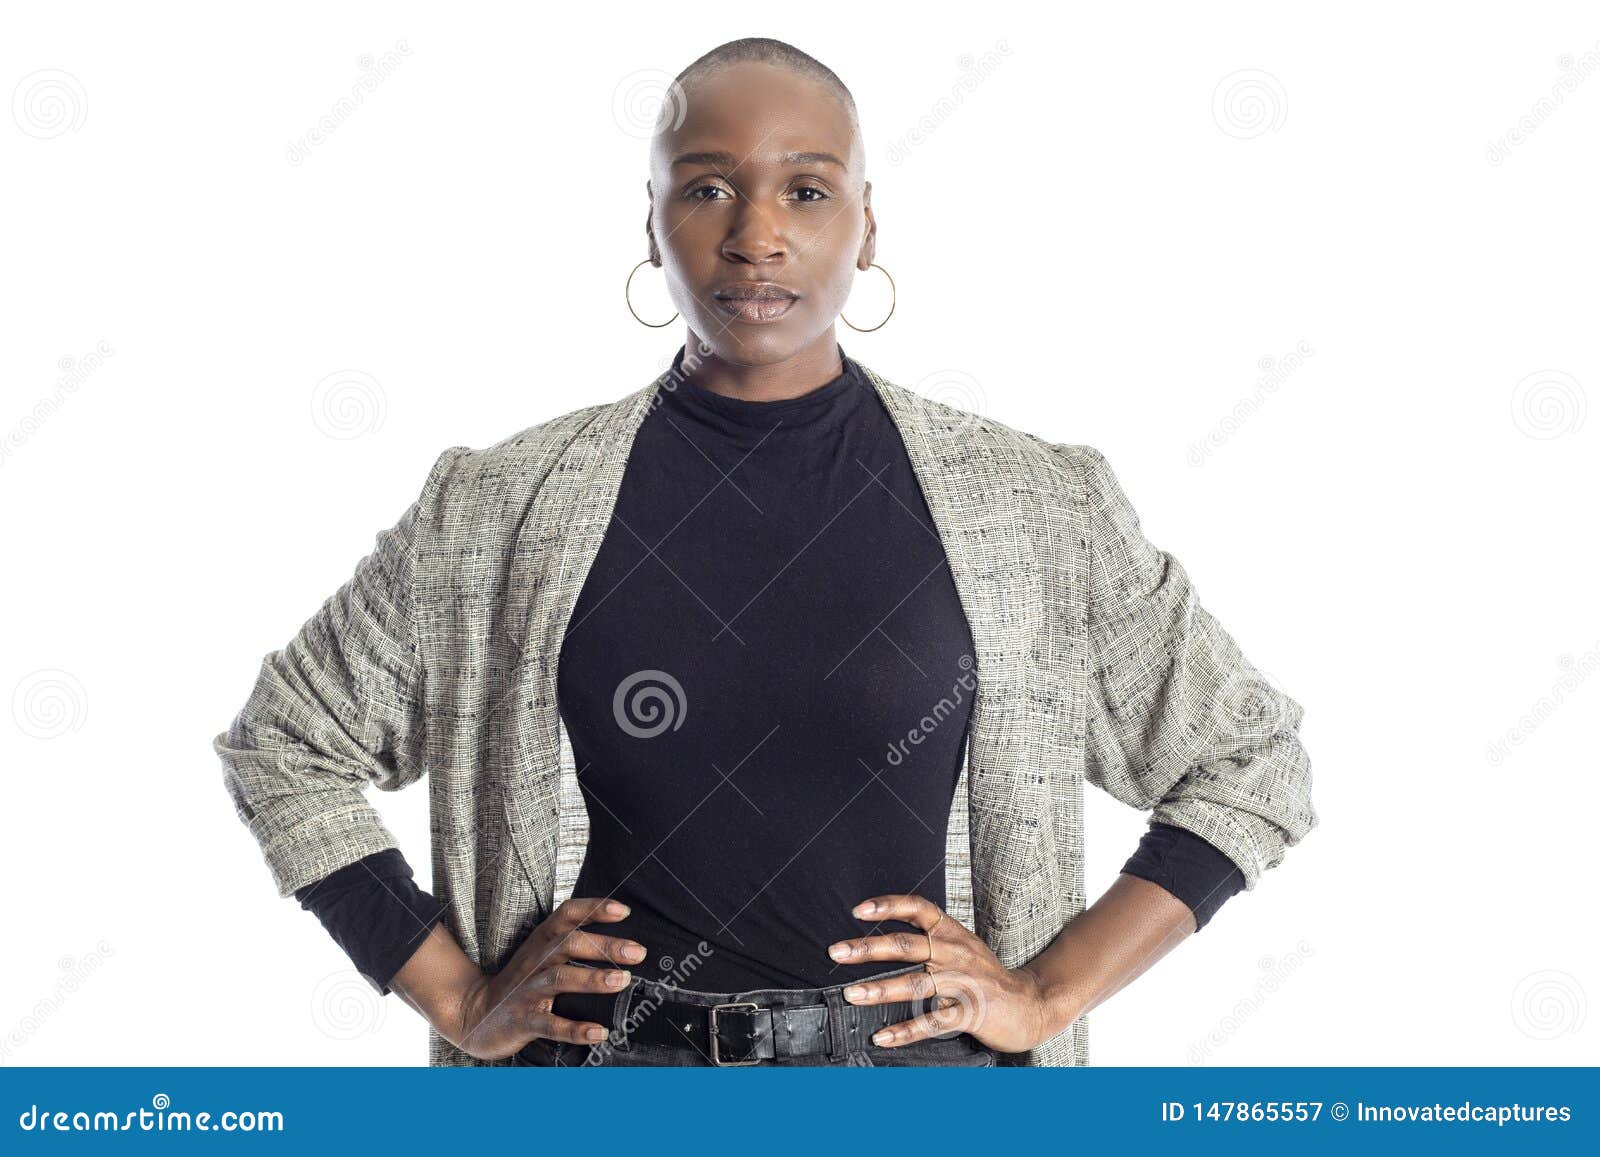 Black Female Fashion Model Wearing Business Casual Attire Stock Image -  Image of african, attire: 147865557